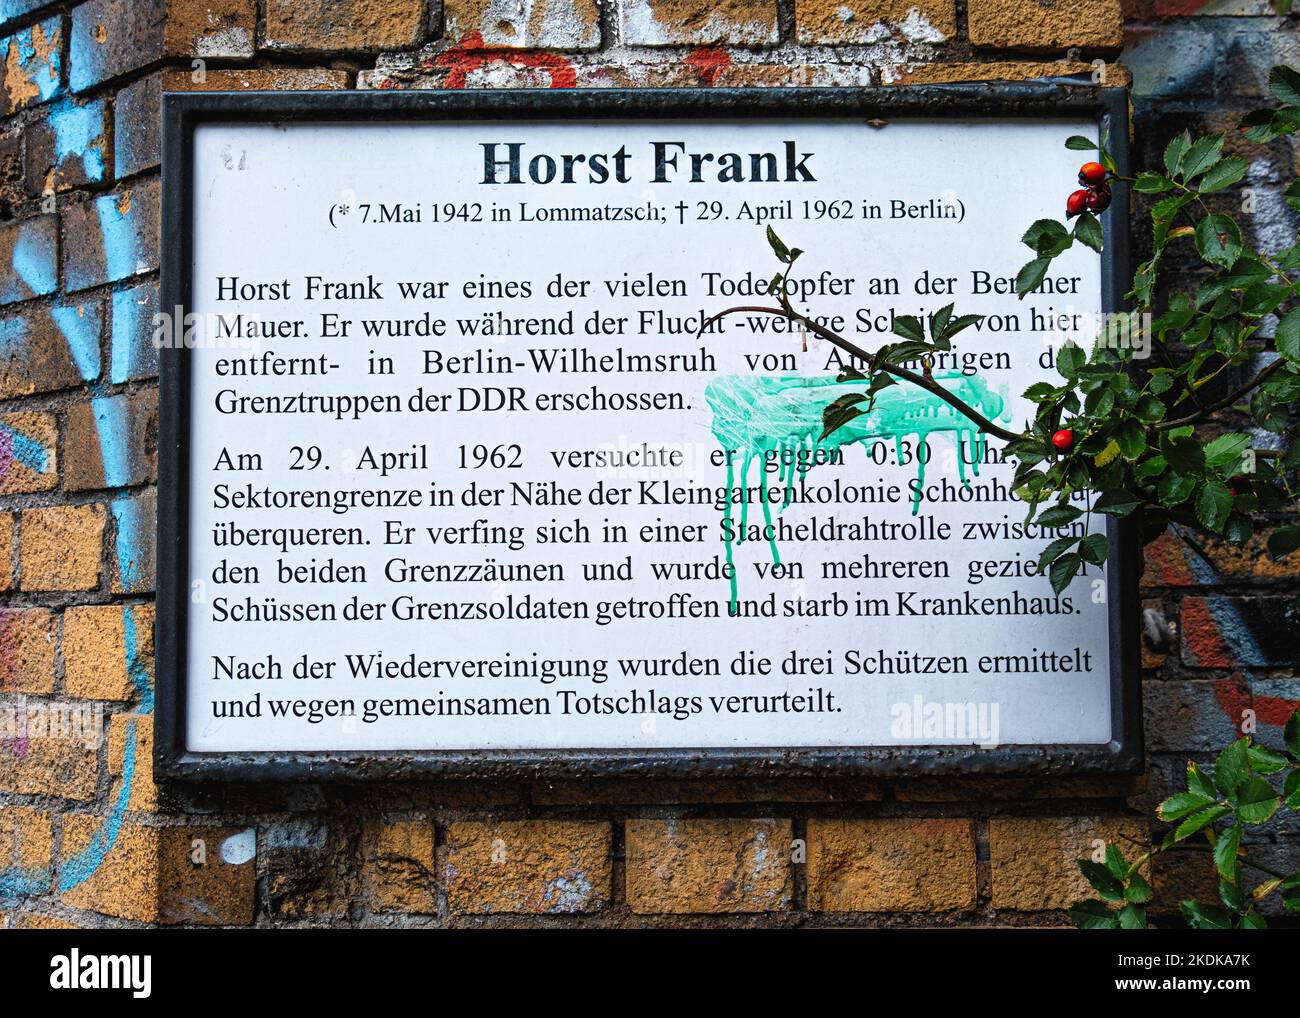 Memorial board for Horst Frank  Berlin Wall victim who died while trying to escape to West Berlin, Klemkestrasse, Niederschönhausen, Pankow, Berlin. Stock Photo